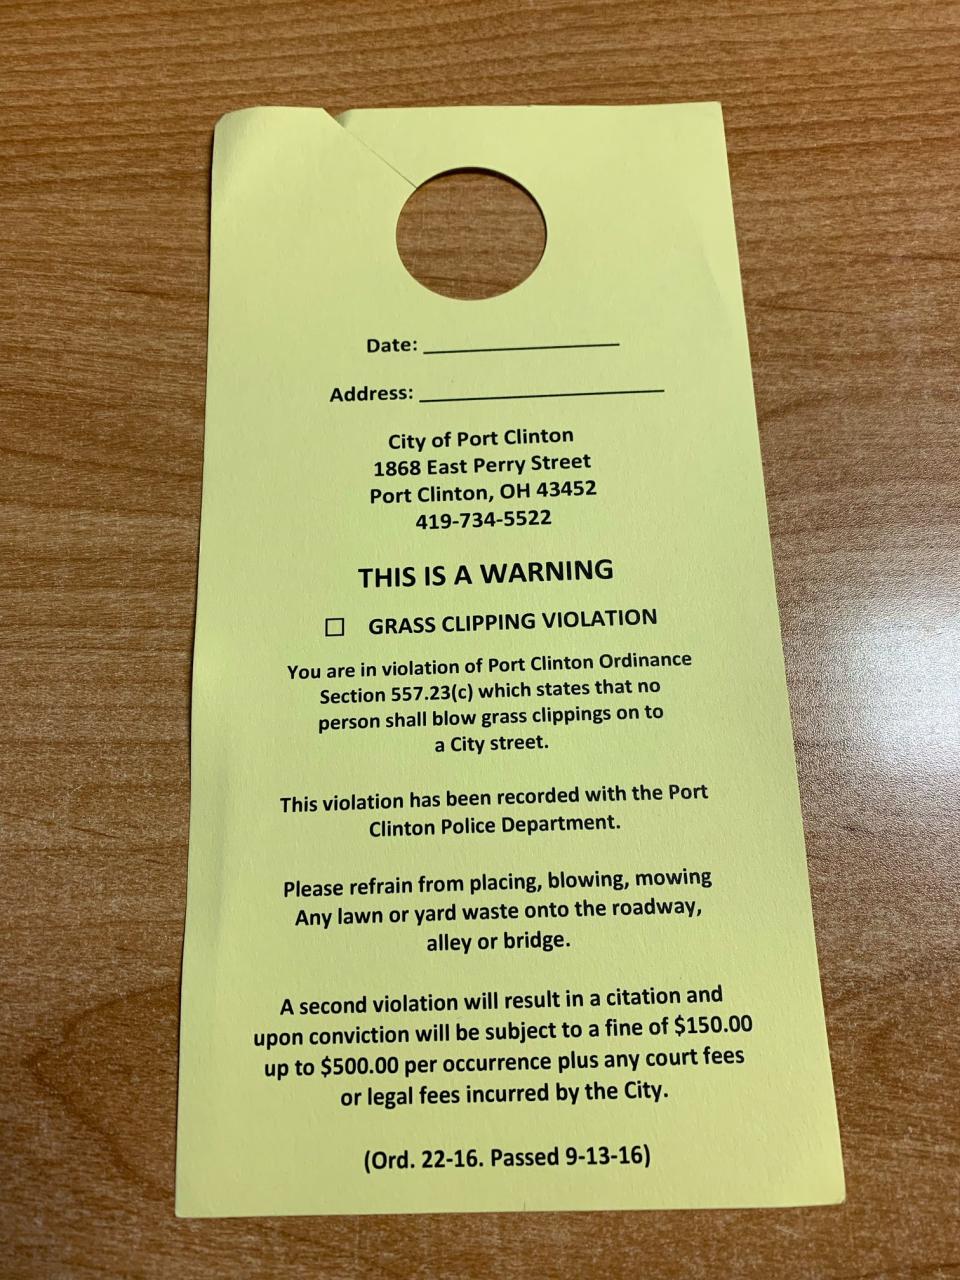 Mayor Mike Snider said police will be enforcing city ordinance Section 557.23(c), which states that no person shall blow grass clippings onto a city street. This door hanger is placed on the doors of violators and explains the city ordinance.